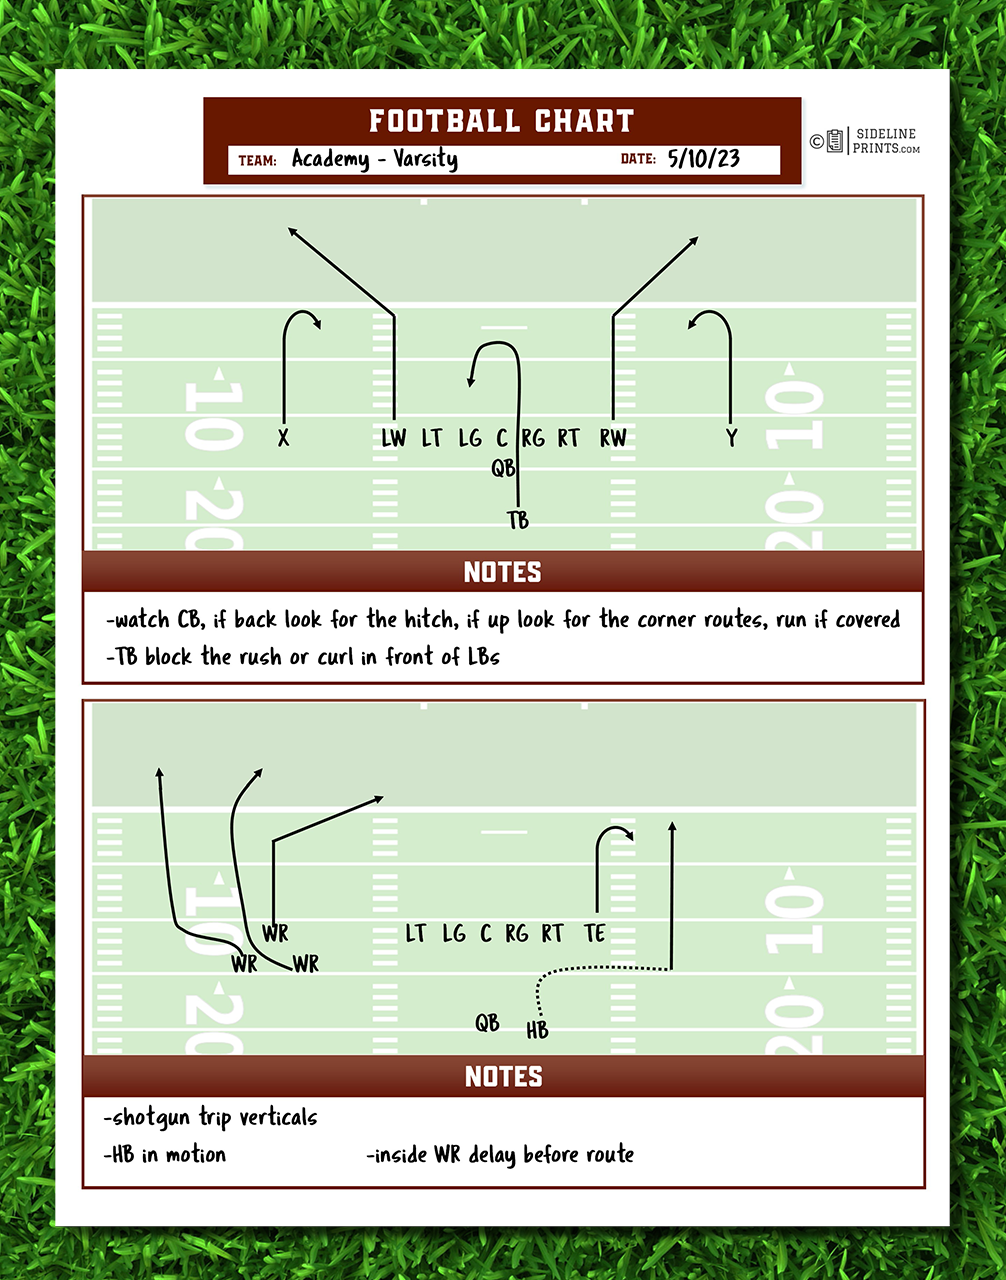 Play Chart x2 Template